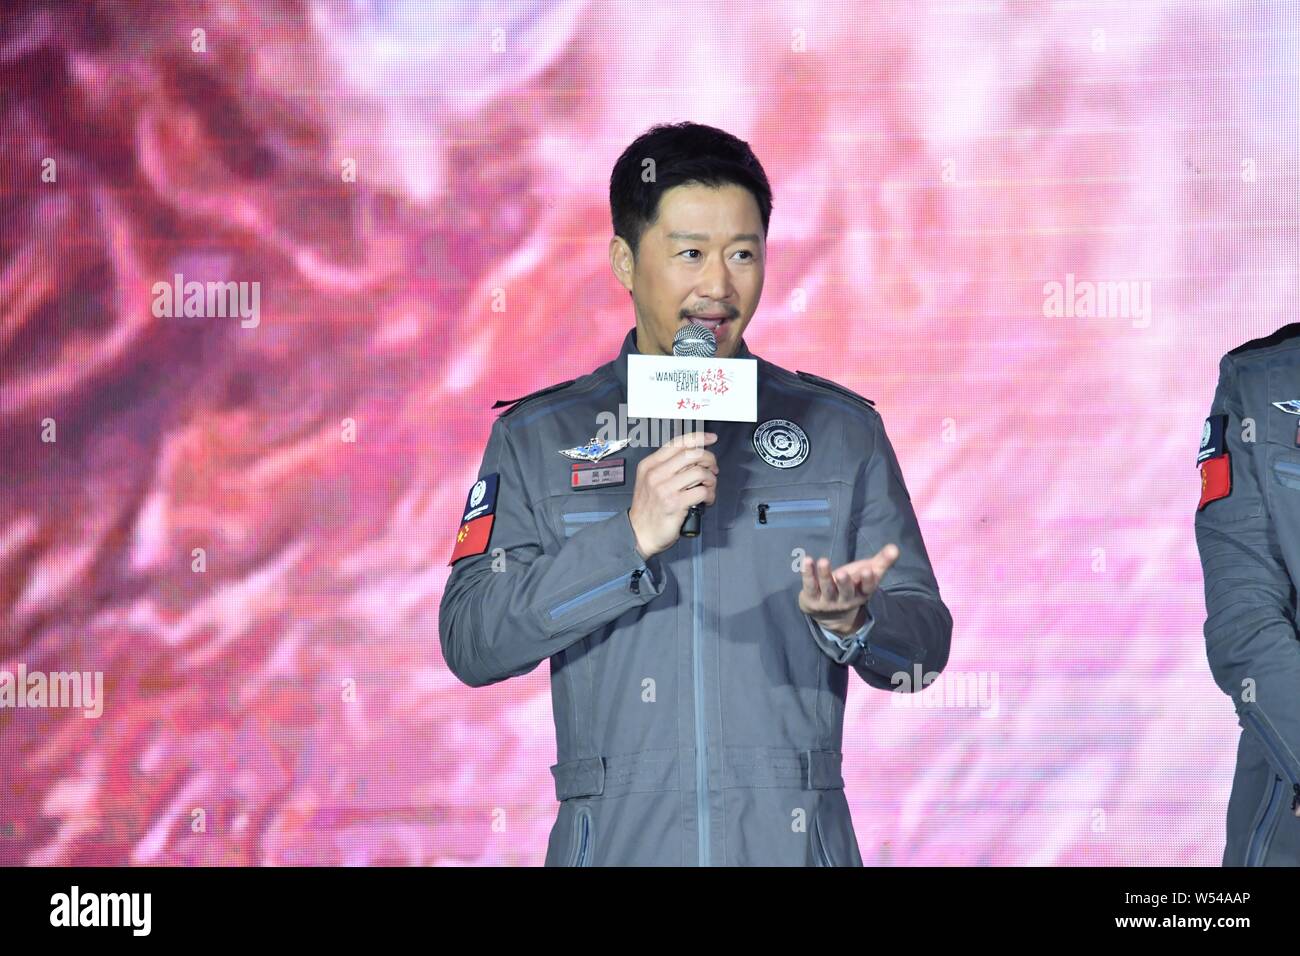 Chinese actor and director Wu Jing attends the premiere event for the science fiction movie "The Wandering Earth" in Beijing, China, 28 January 2019. Stock Photo